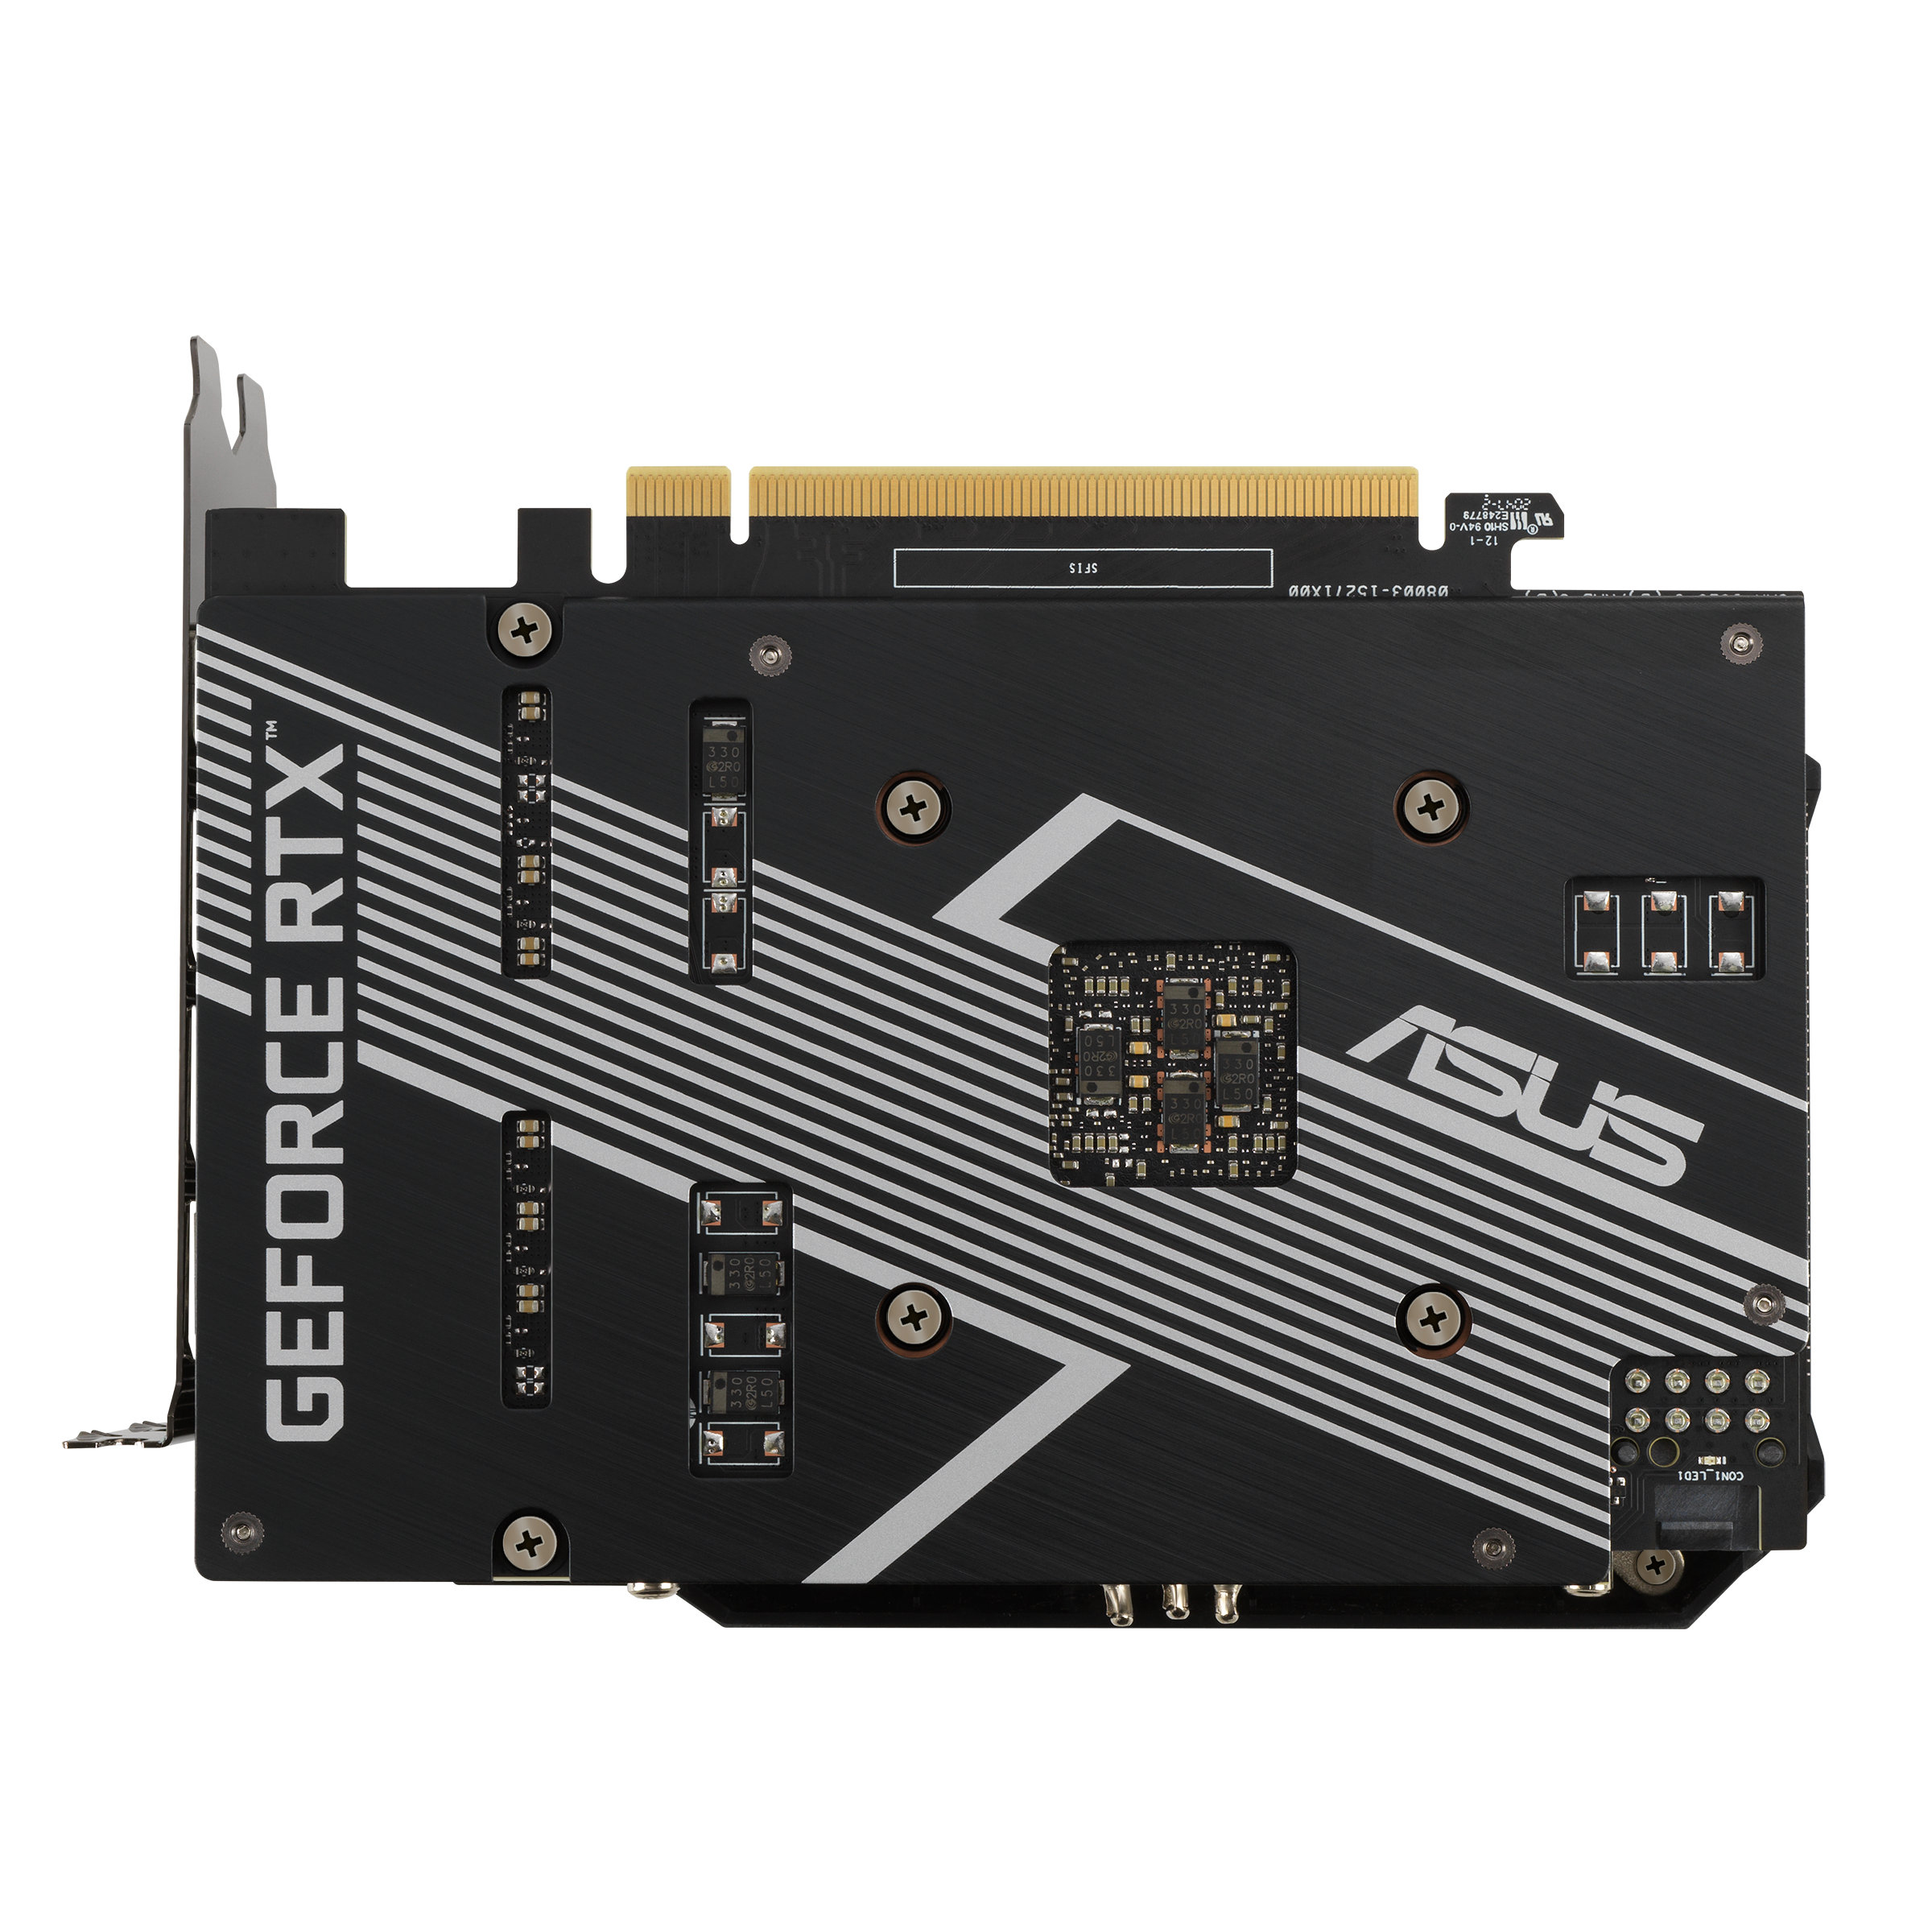 Media asset in full size related to 3dfxzone.it news item entitled as follows: ASUS introduce la video card GeForce RTX 3060 Phoenix 12GB GDDR6 | Image Name: news31864_ASUS-GeForce-RTX-3060-Phoenix_2.png